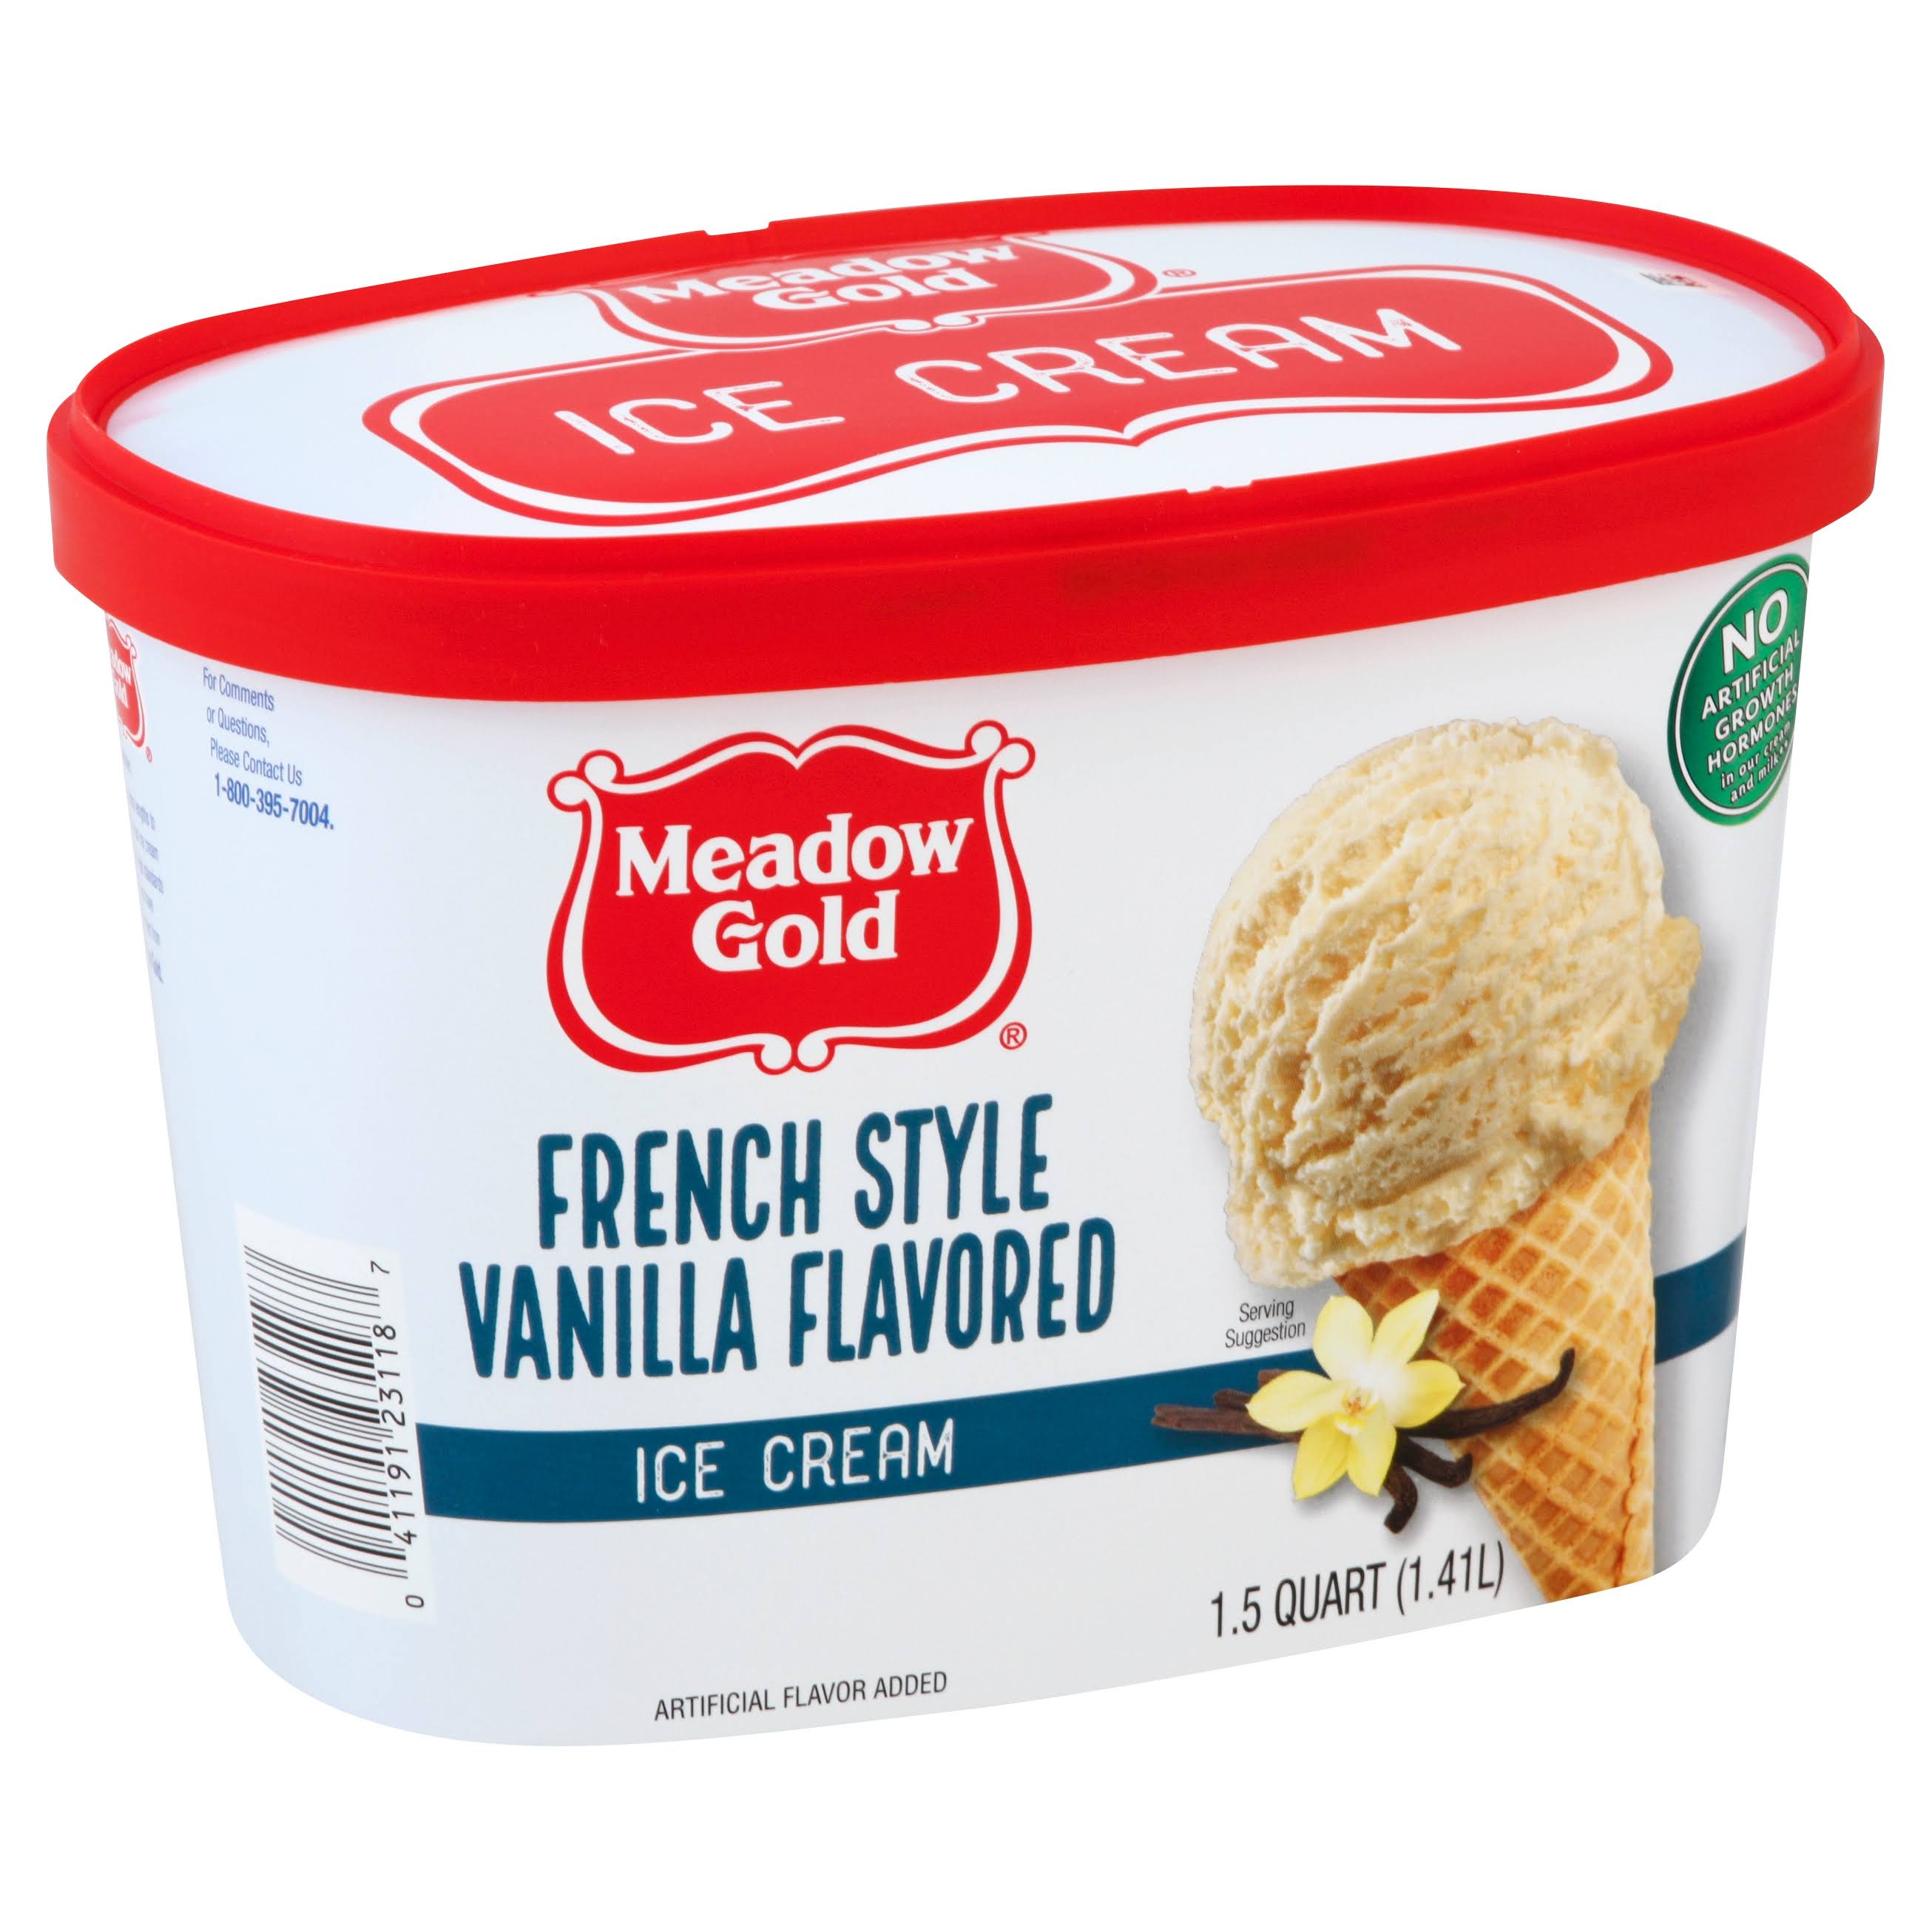 Meadow Gold Ice Cream, Vanilla Flavored, French Style - 1.5 quart